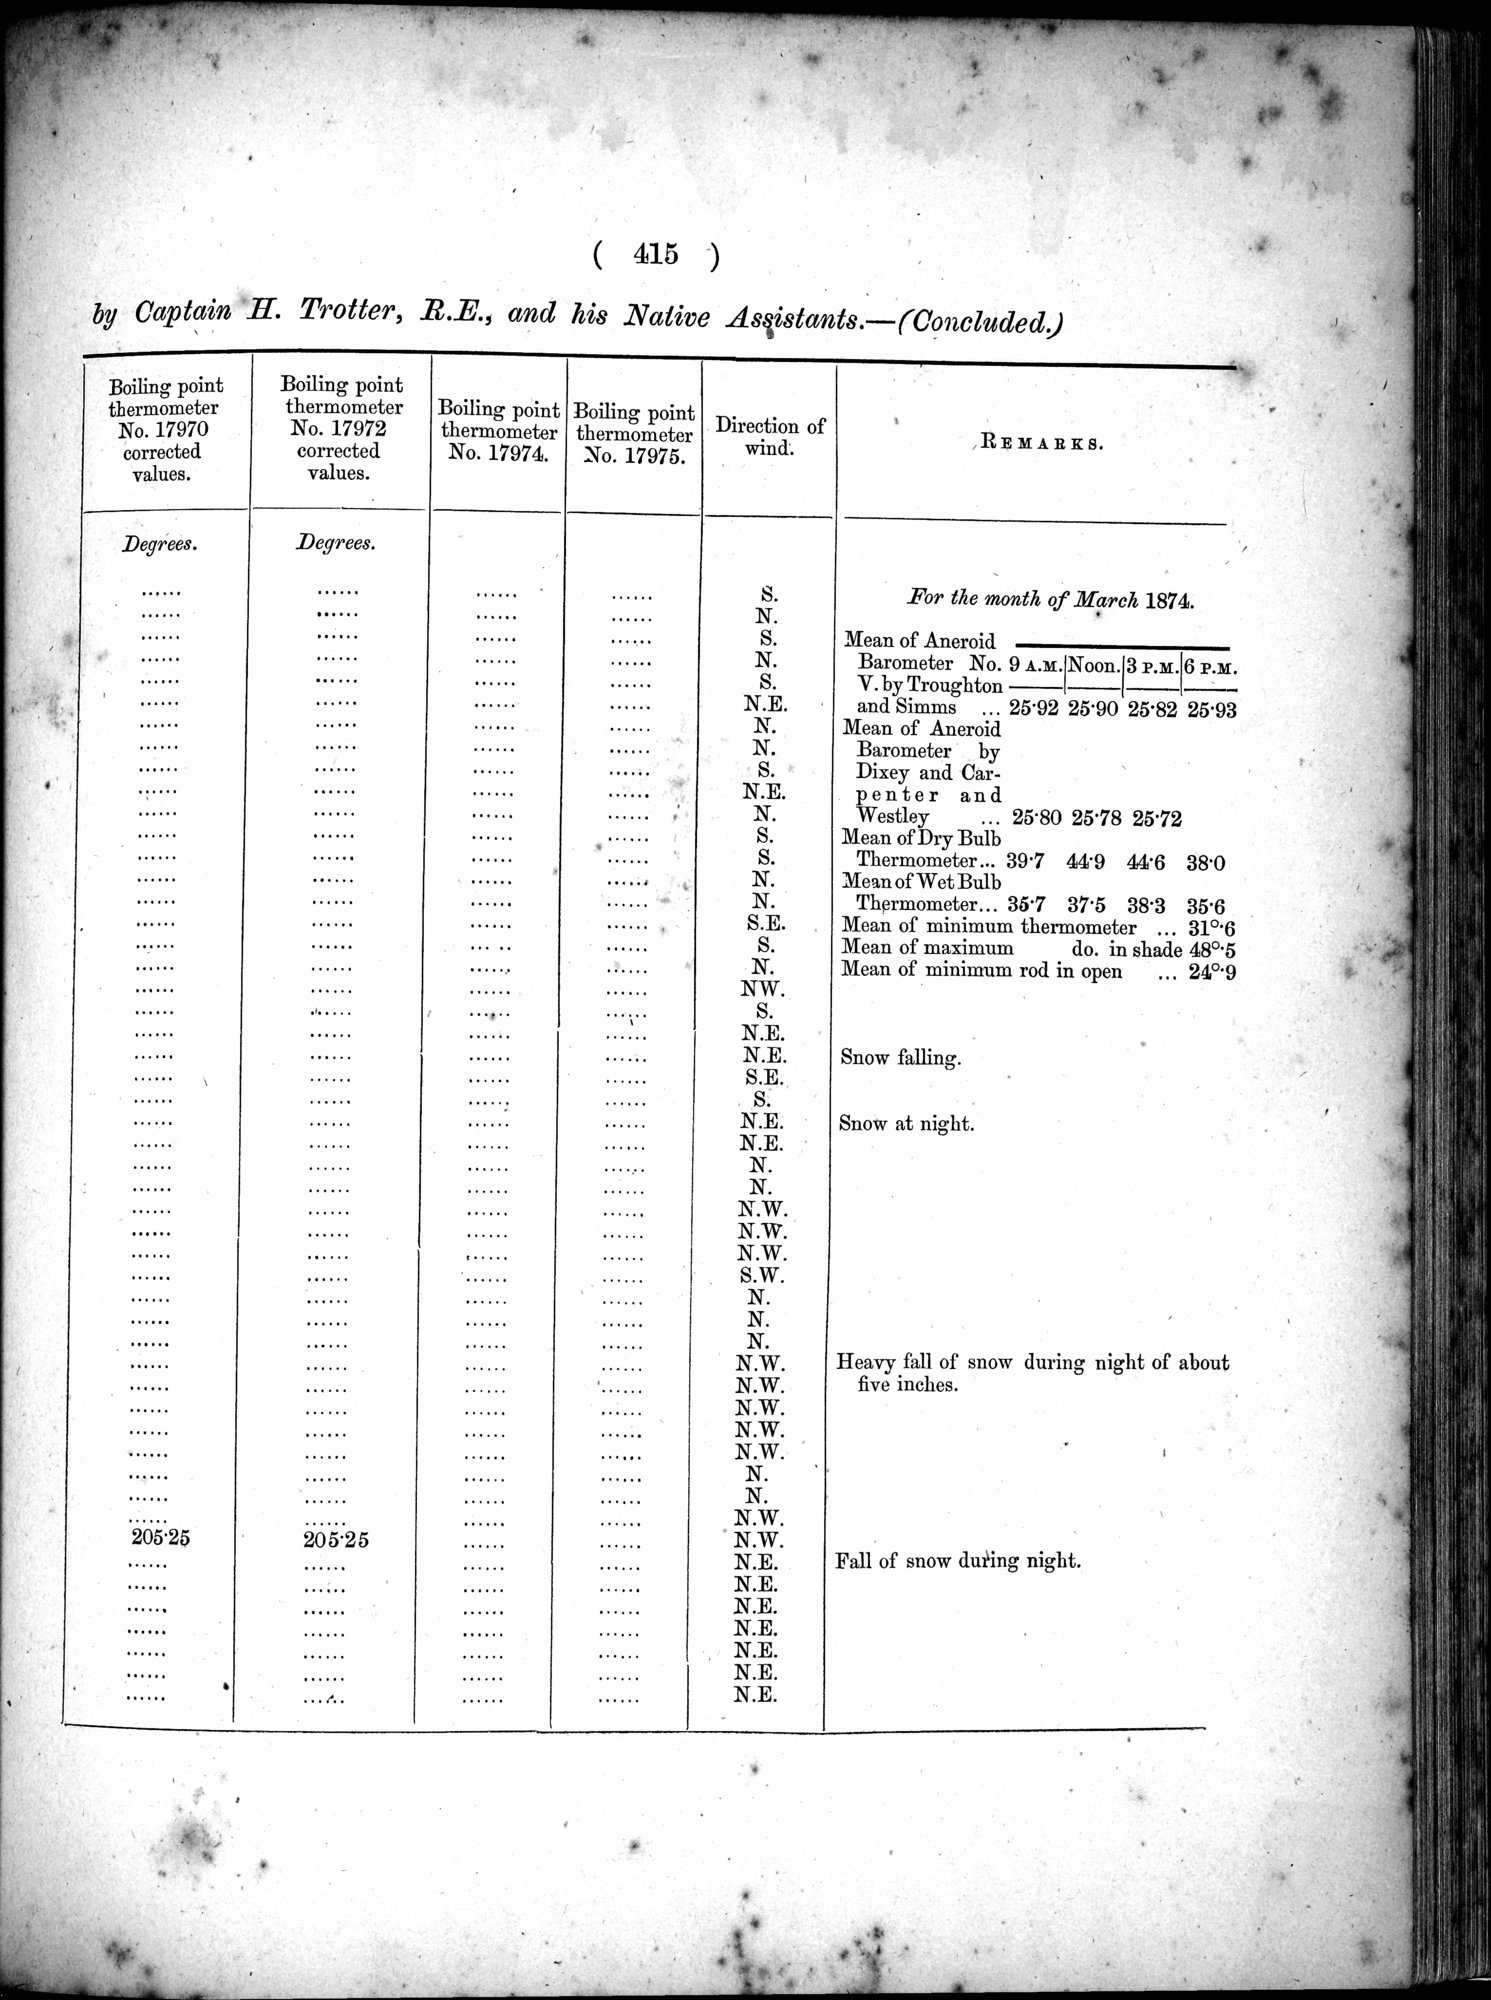 Report of a Mission to Yarkund in 1873 : vol.1 / Page 549 (Grayscale High Resolution Image)